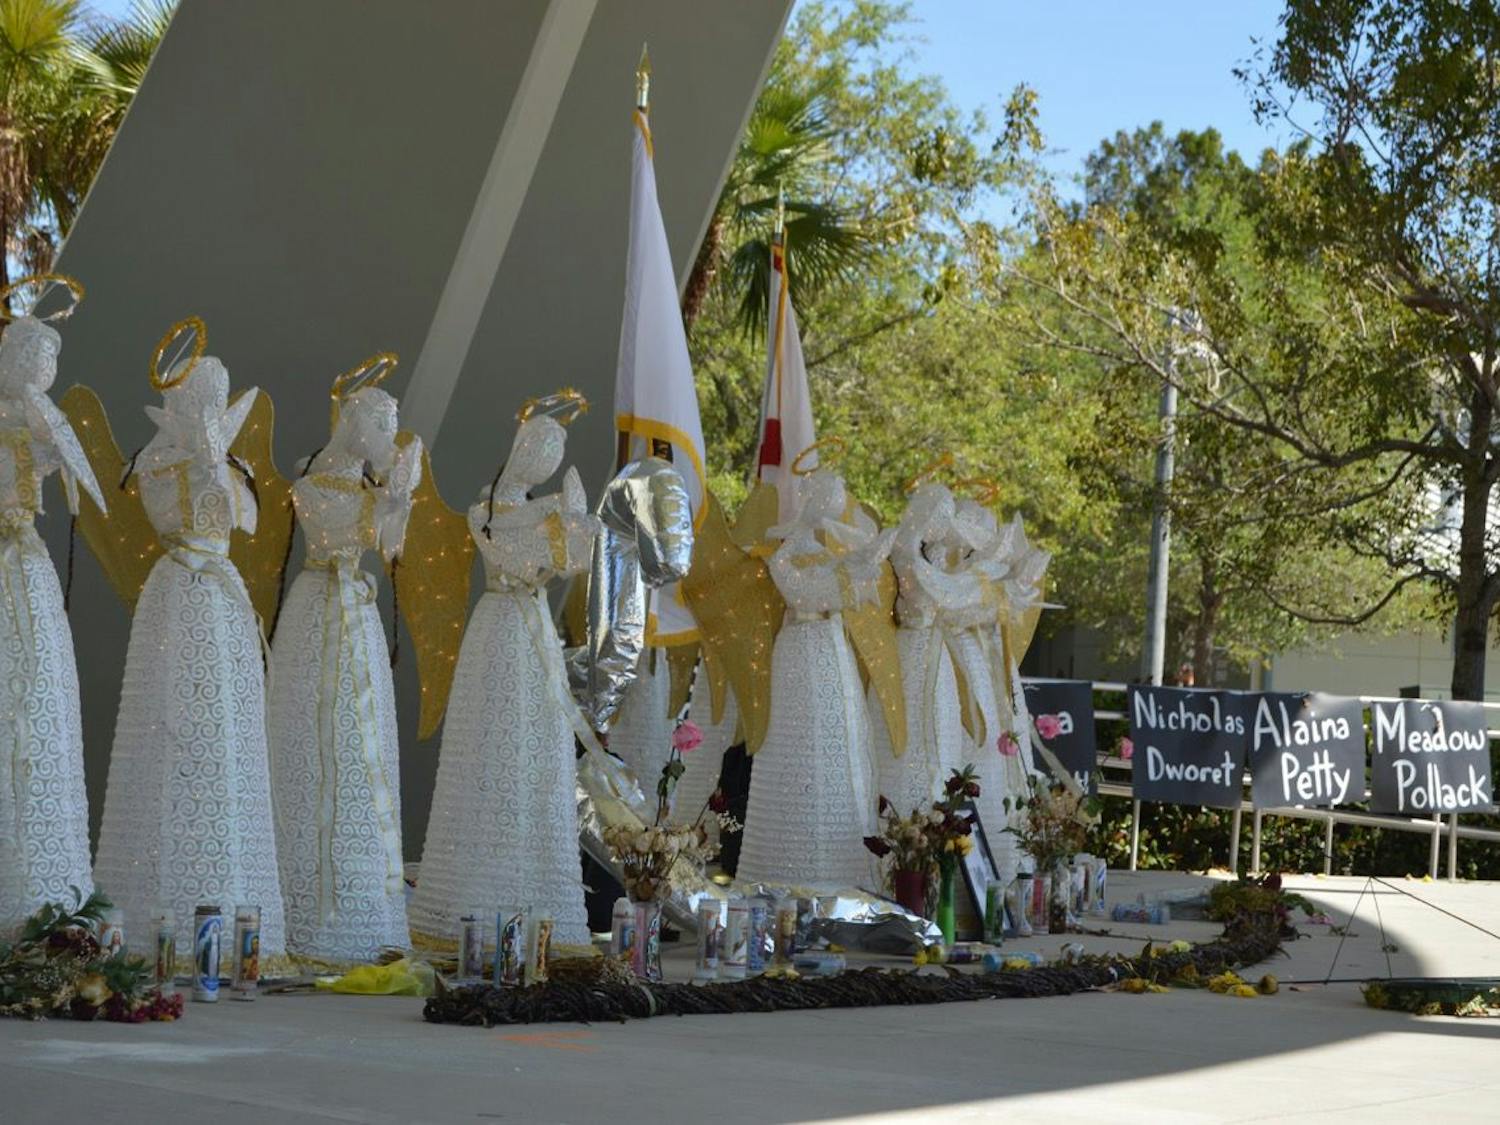 Seventeen angel statues face outward at the memorial at Pine Trails Park in Parkland, Florida. The statues were put up for the vigil the day after the shooting.
&nbsp;